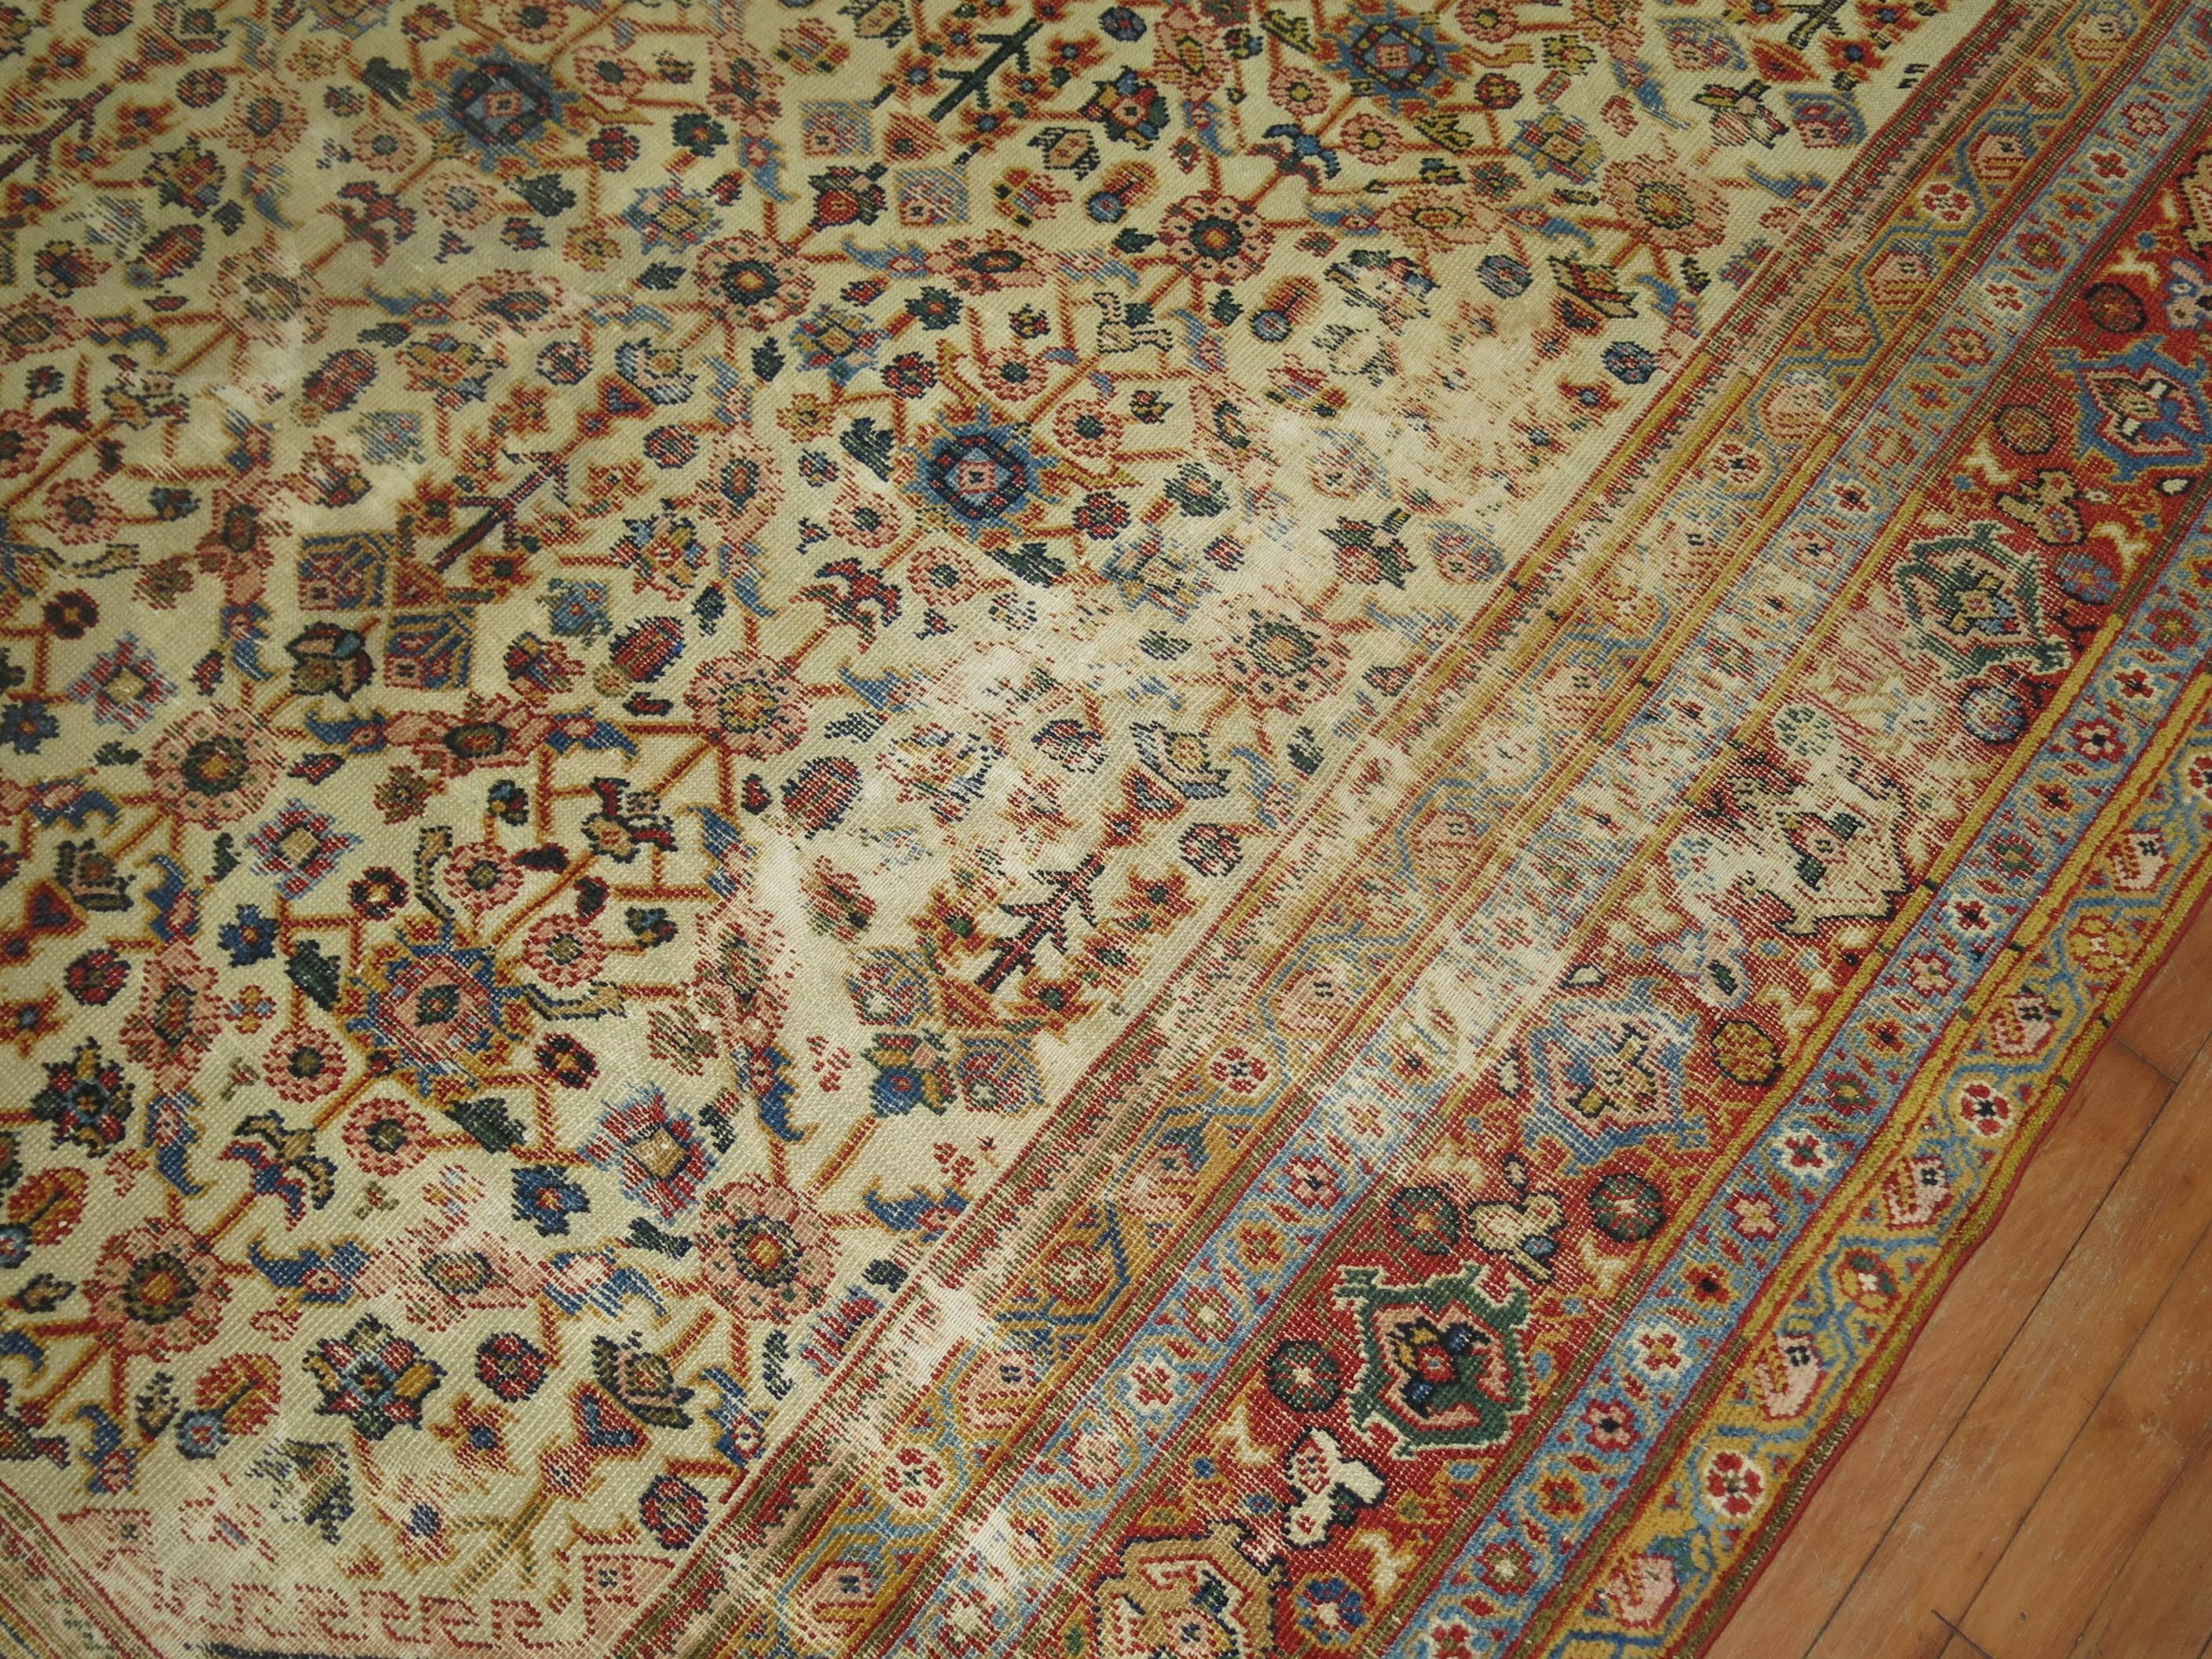 Worn Persian Room Size Oriental Early 20th Century Rug 2